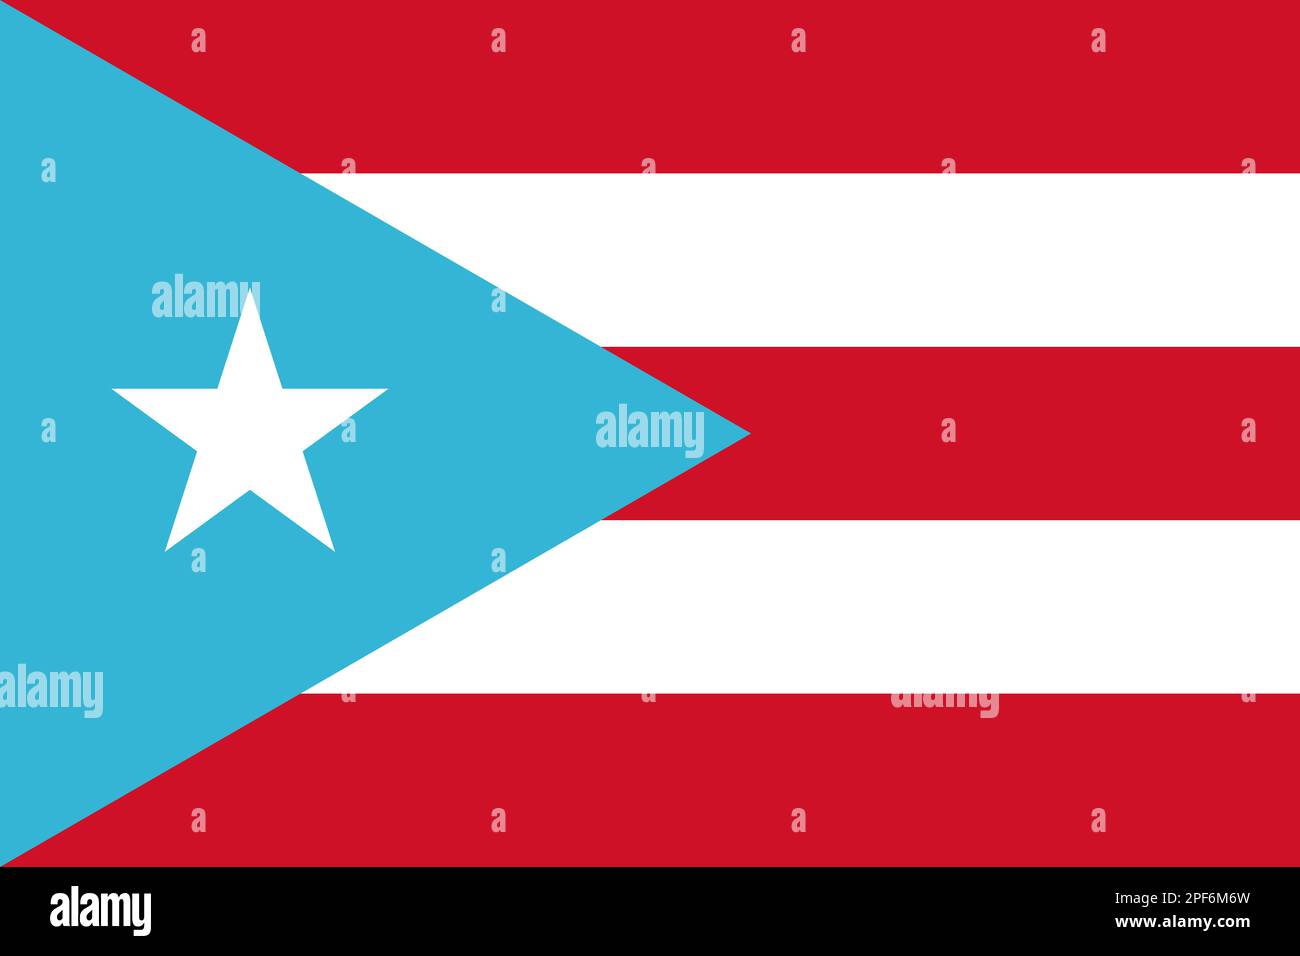 https://c8.alamy.com/comp/2PF6M6W/flag-of-latin-americans-puerto-ricans-flag-representing-ethnic-group-or-culture-regional-authorities-no-flagpole-plane-design-layout-2PF6M6W.jpg